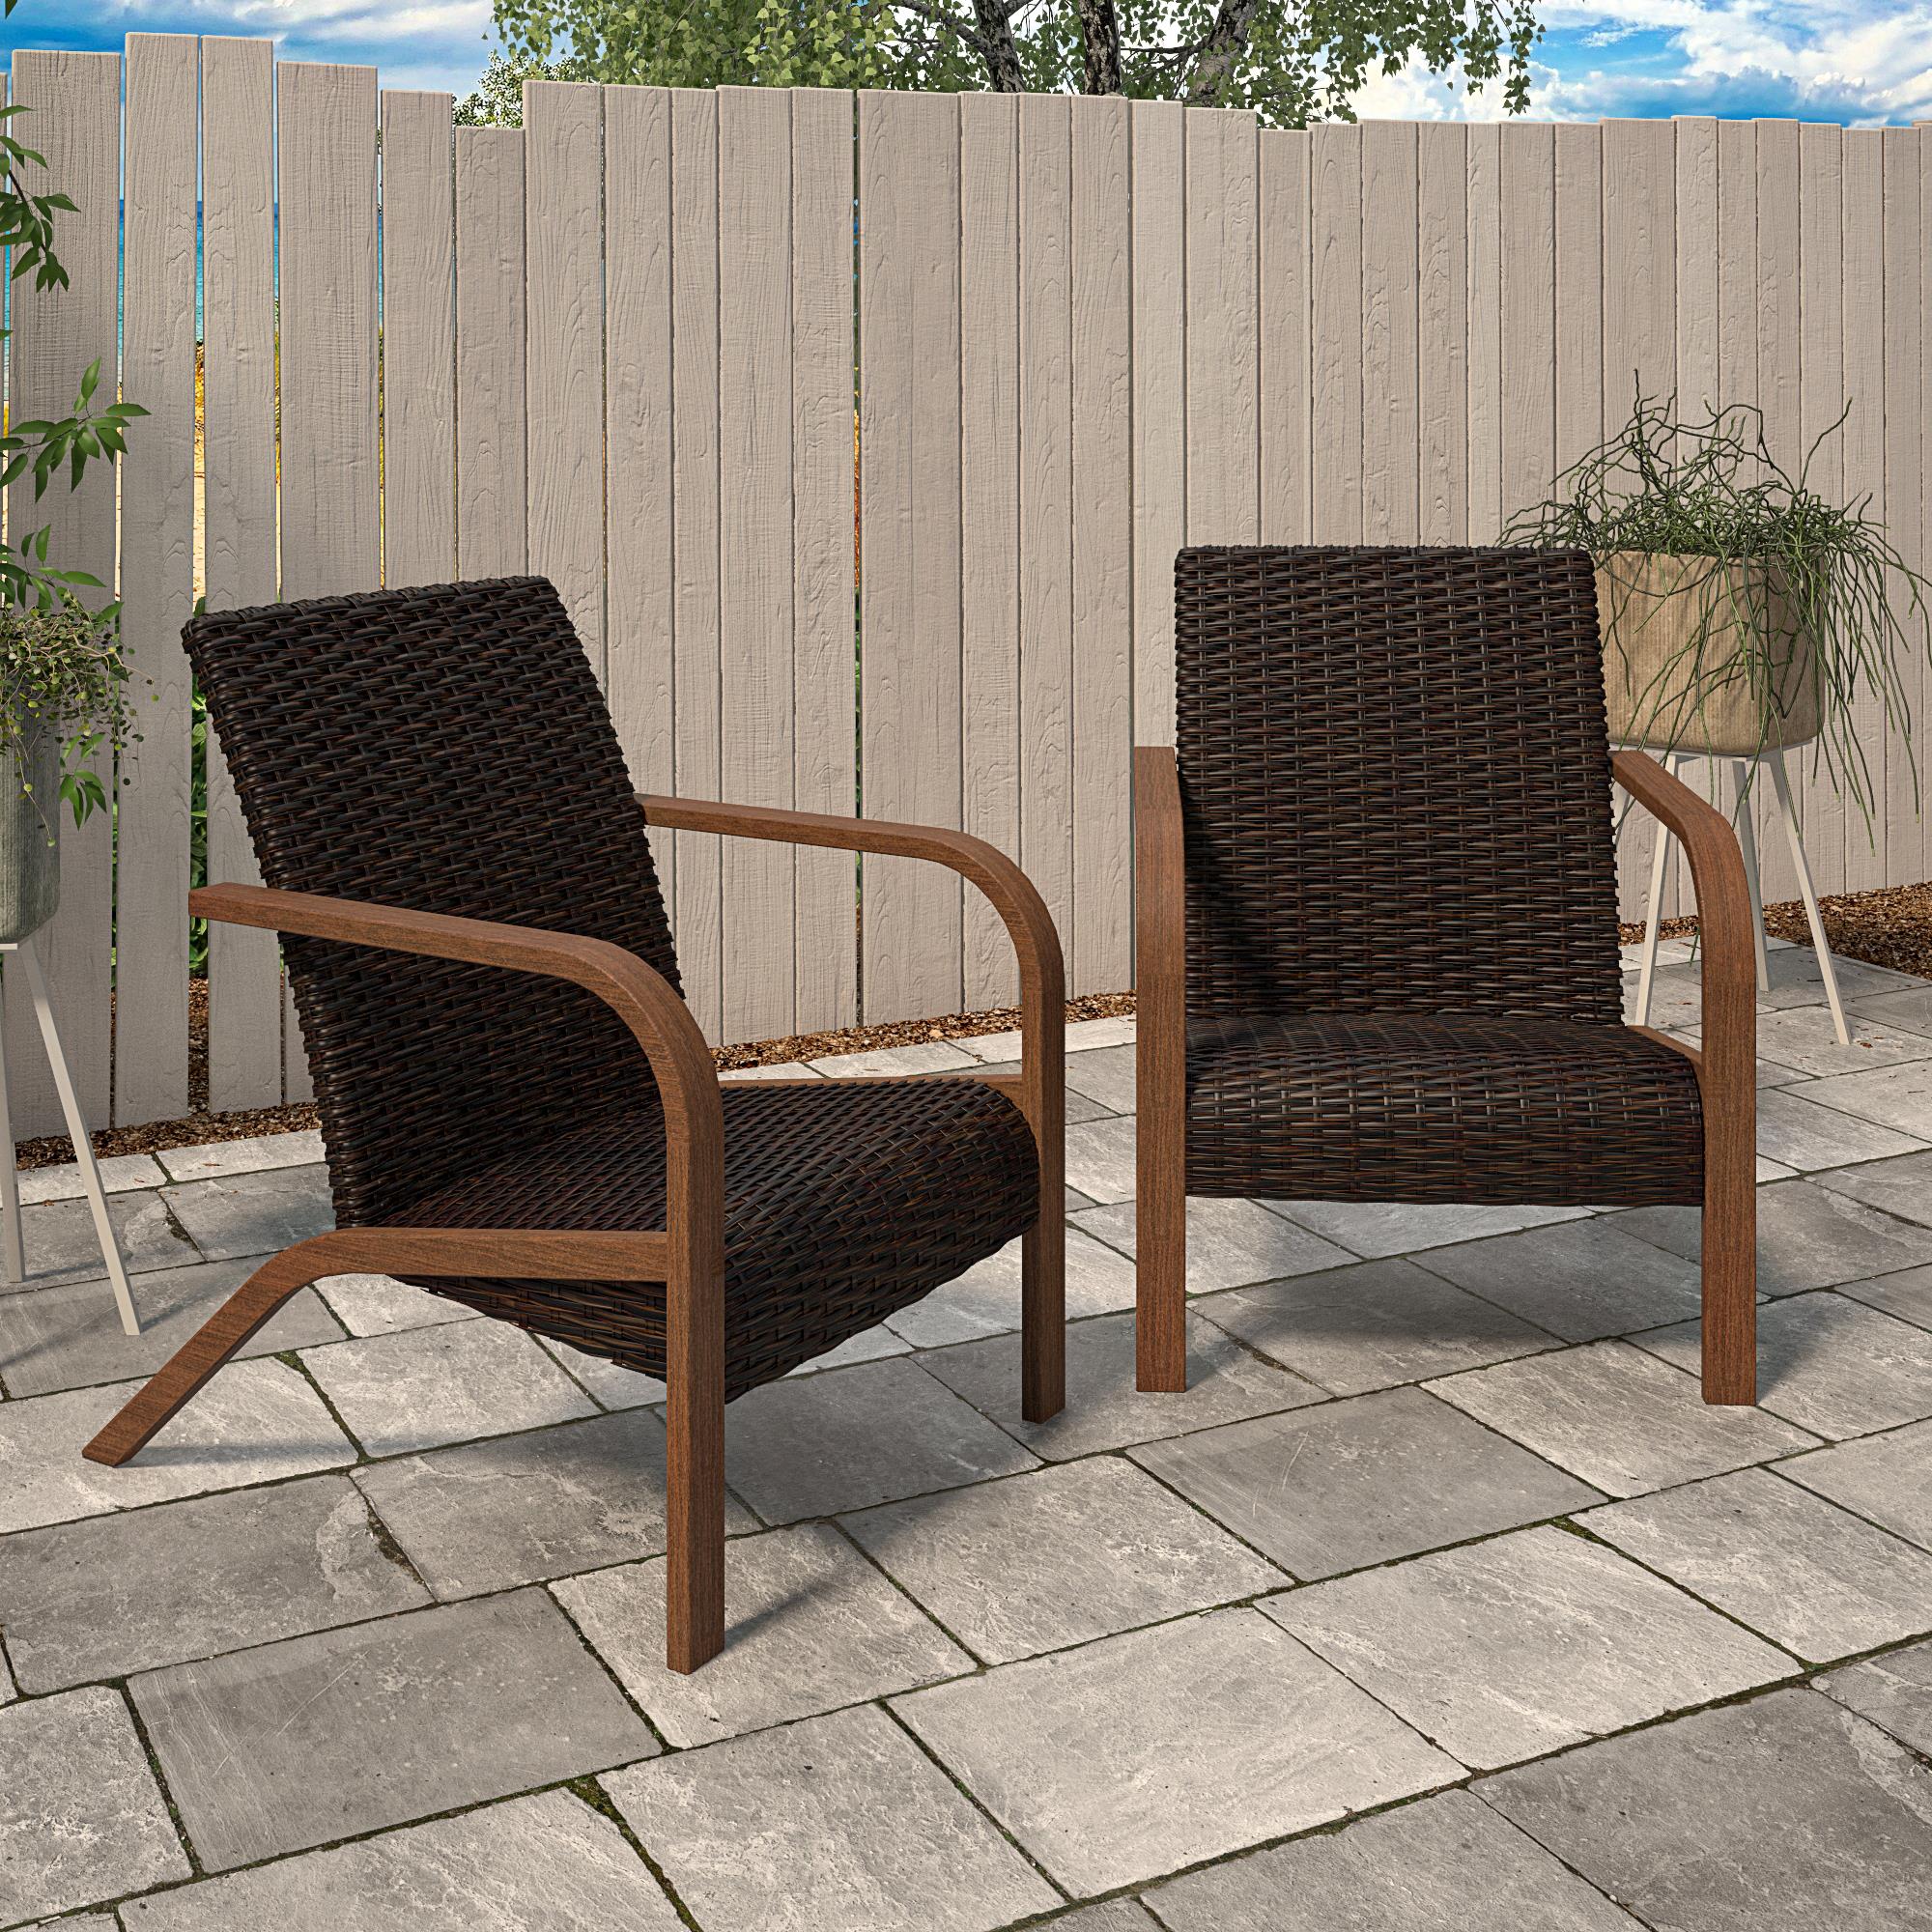 COSCO Outdoor Living, SmartWick, Patio Lounge Chairs, 2-Pack, Dark Brown - image 1 of 8